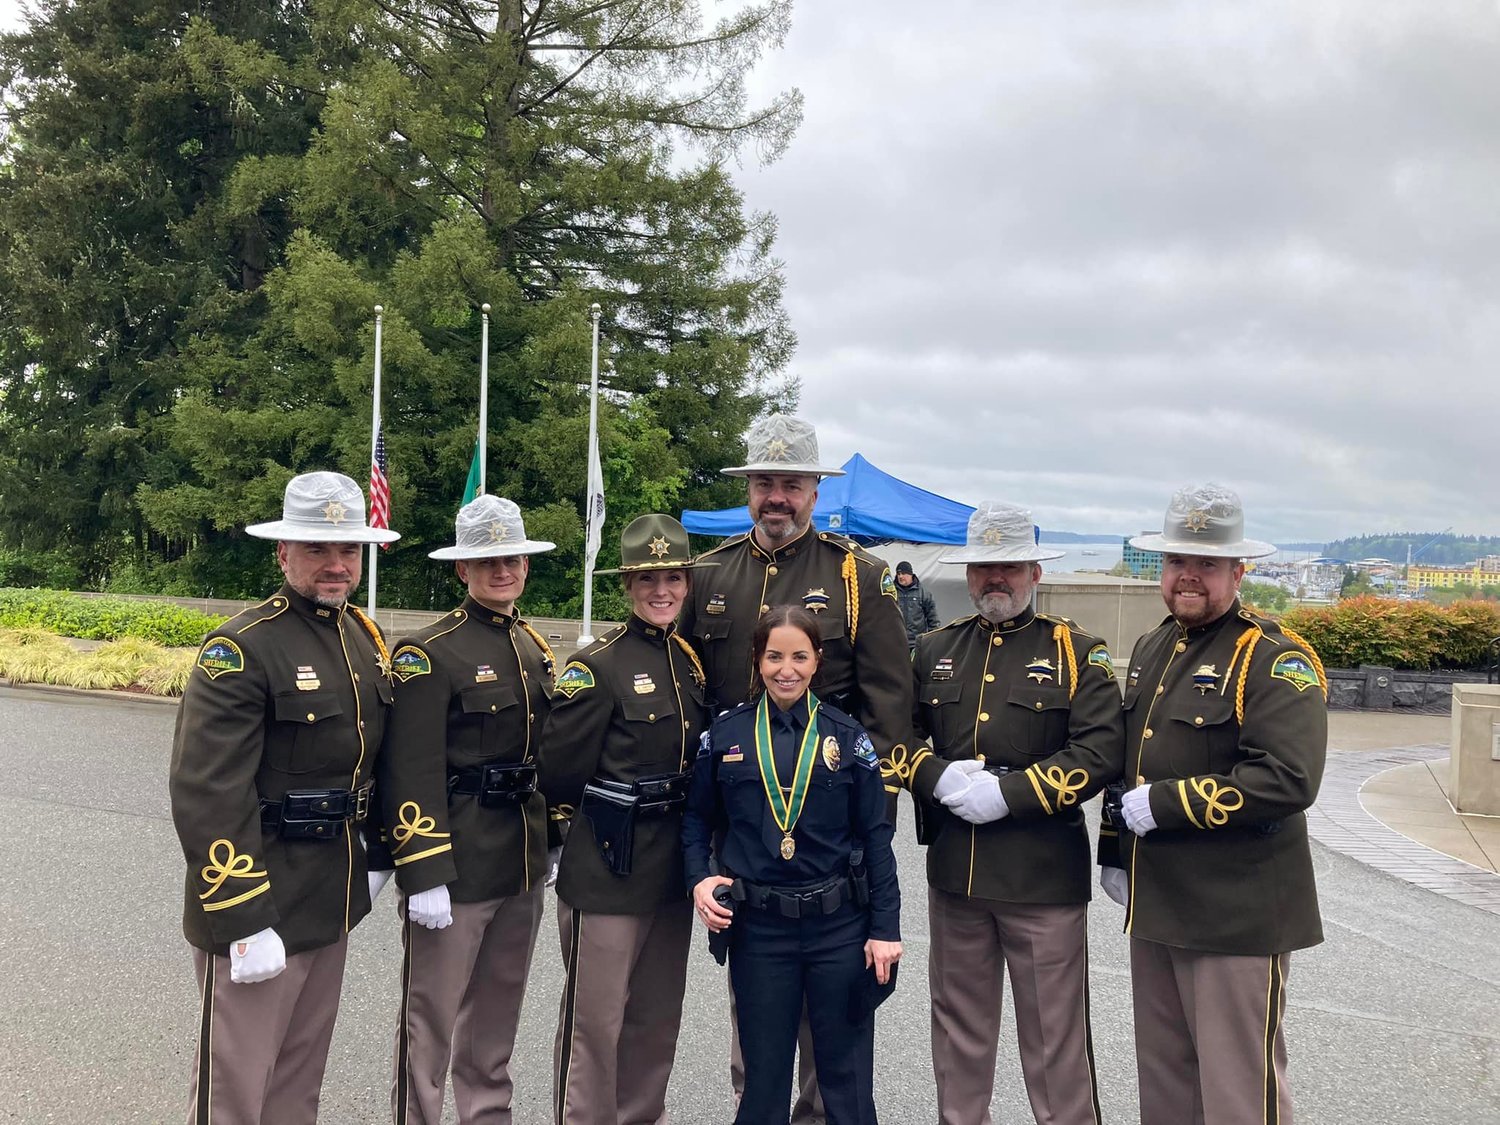 Former Thurston County Deputy Andrea Moore, center, is pictured with the Thurston County Sheriff’s Office Honor Guard on May 6 at the  Washington State Law Enforcement Medal of Honor and Peace Officers Memorial Ceremony.